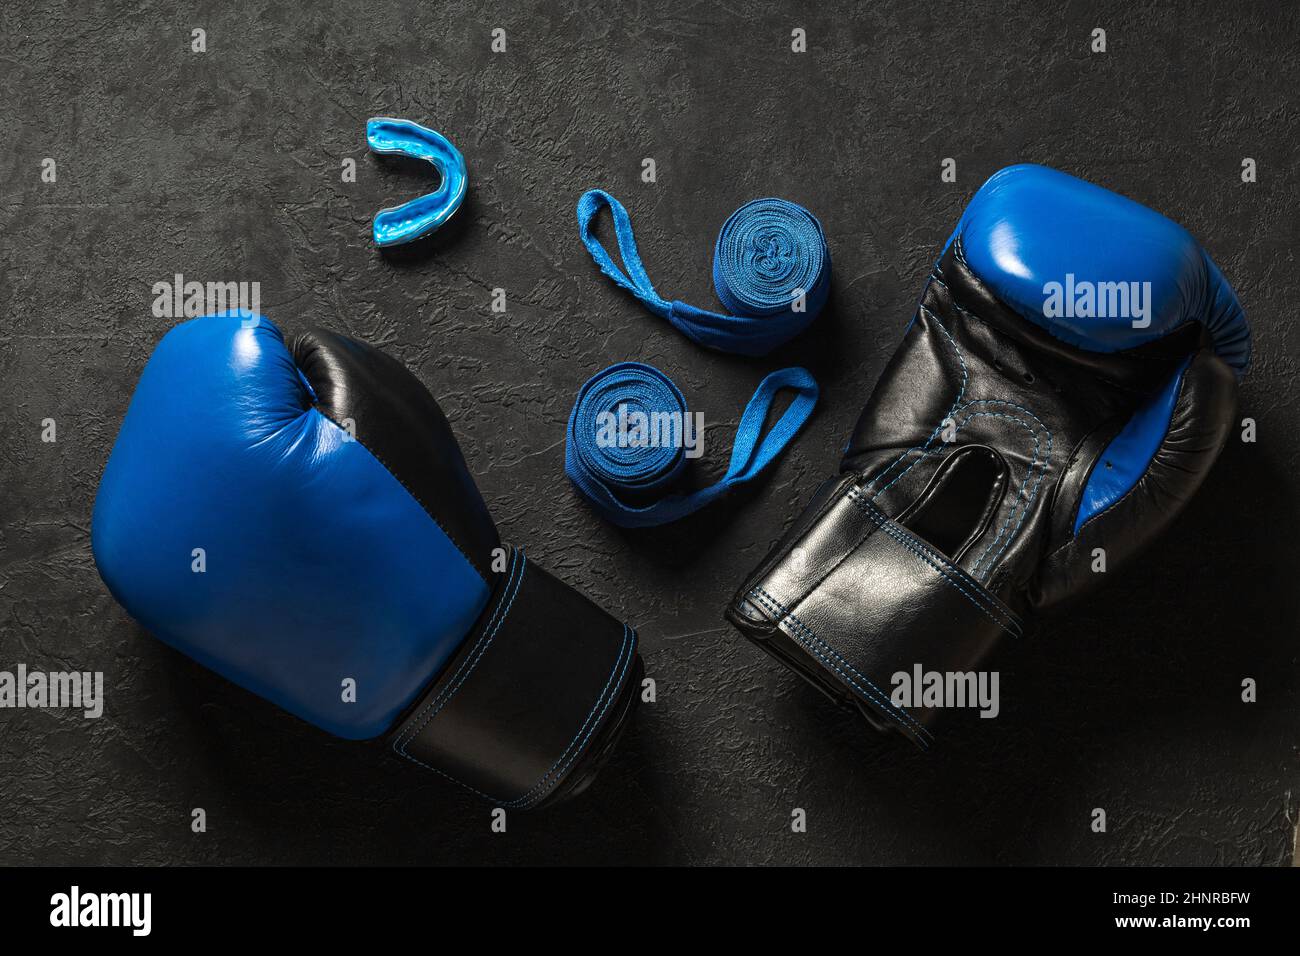 Boxing gloves with mouthguard and blue boxing bandages on a black background. Stock Photo